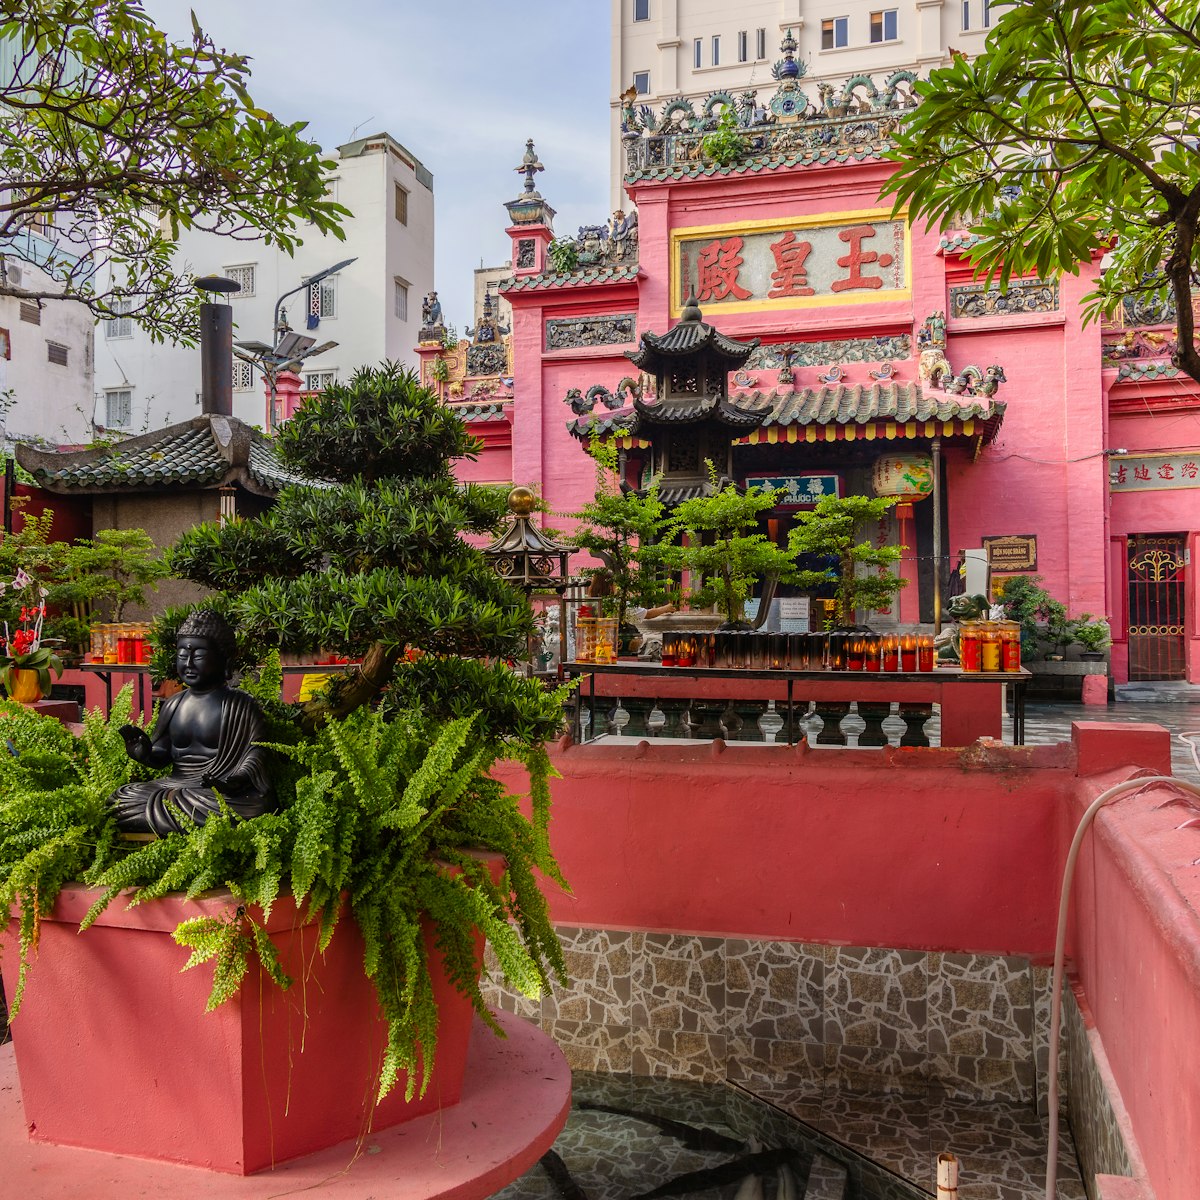 Jade Emperor Pagoda in Ho Chi Minh City, Vietnam is one of the major tourists sights.
1517614391